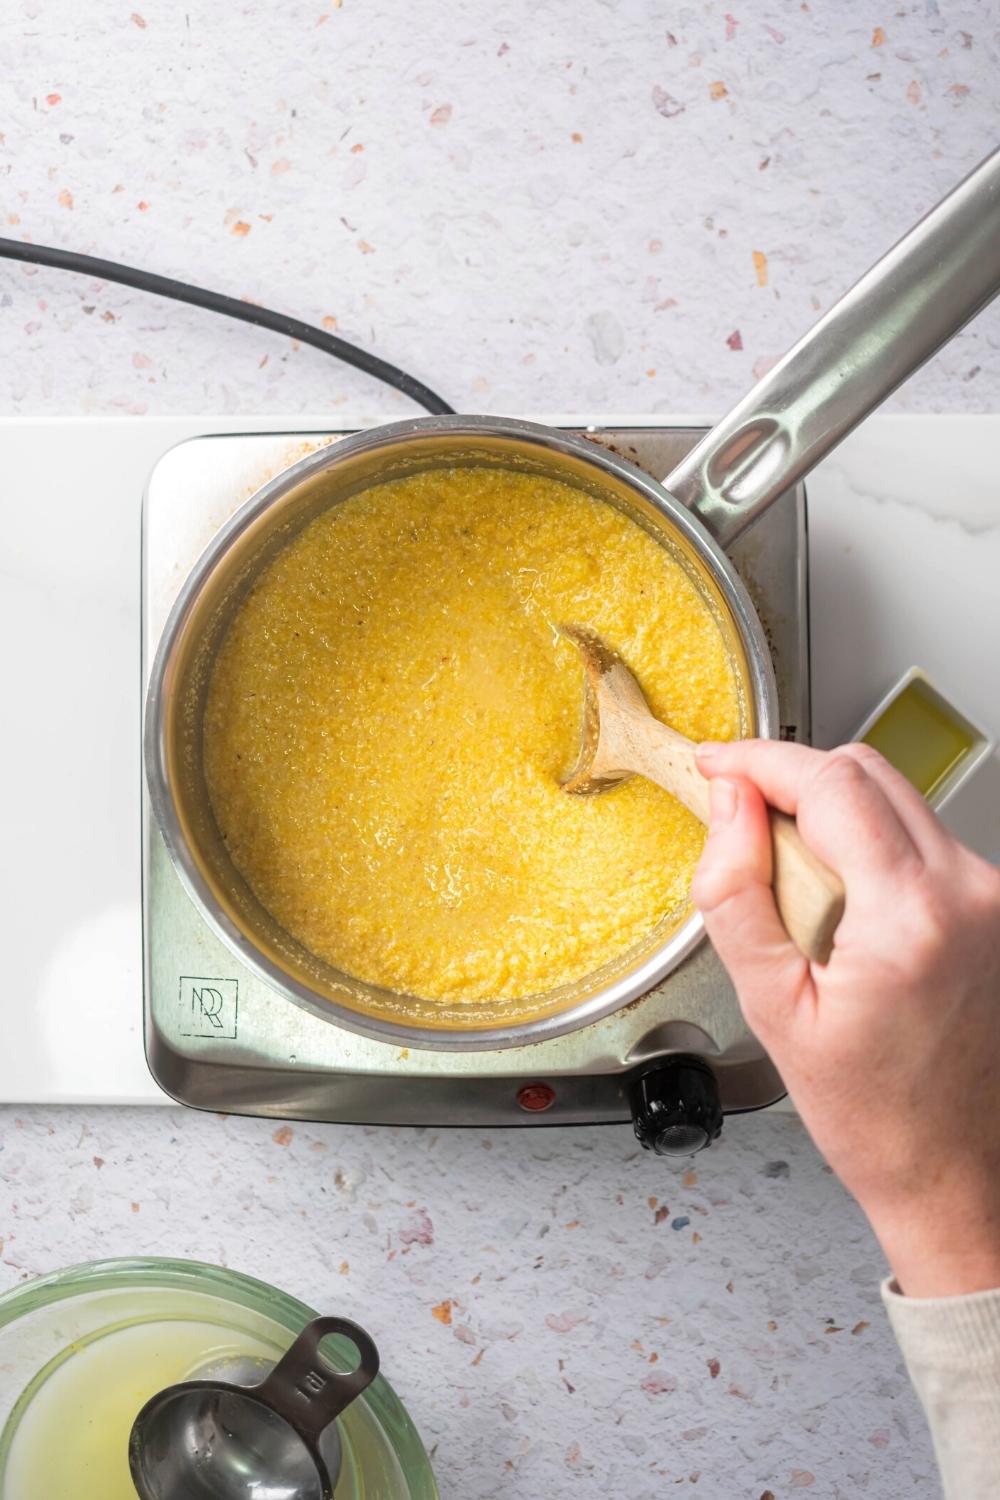 A hand holding a wooden spoon that is submerged in a pot filled with creamy polenta. The pot is on a burner that is set on a white counter.